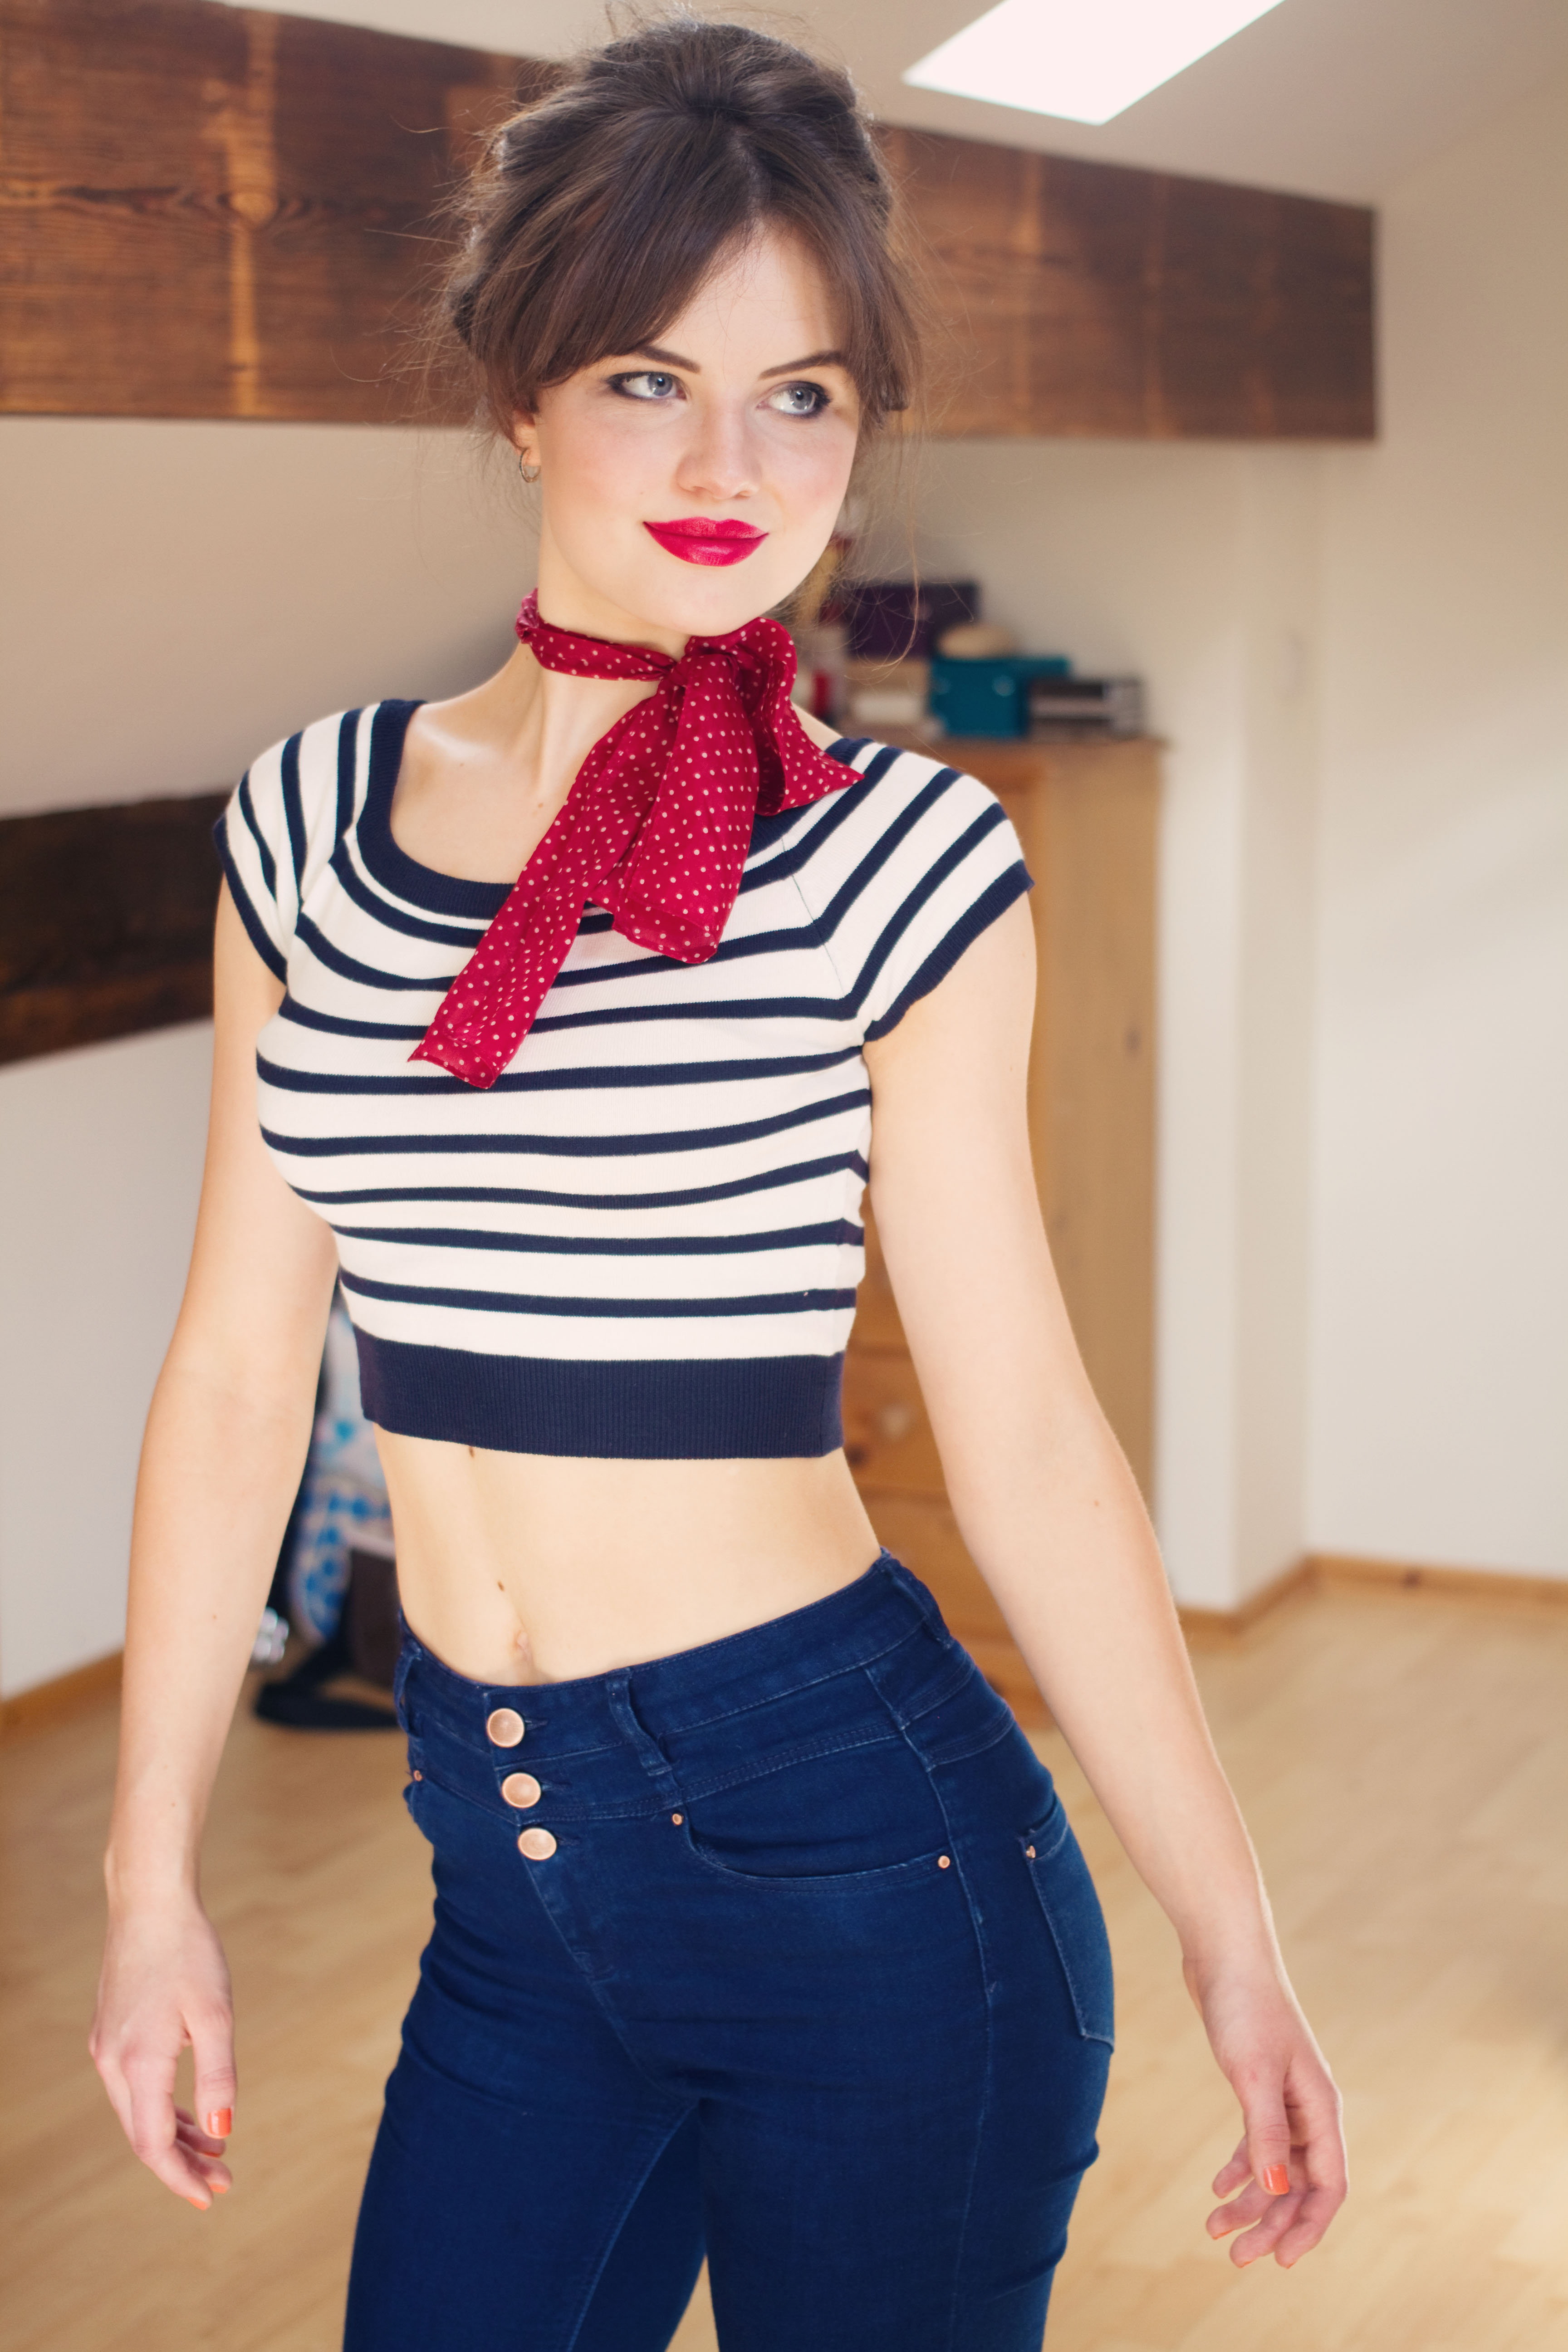 Portrait of teen girl wearing striped top and high waist jeans